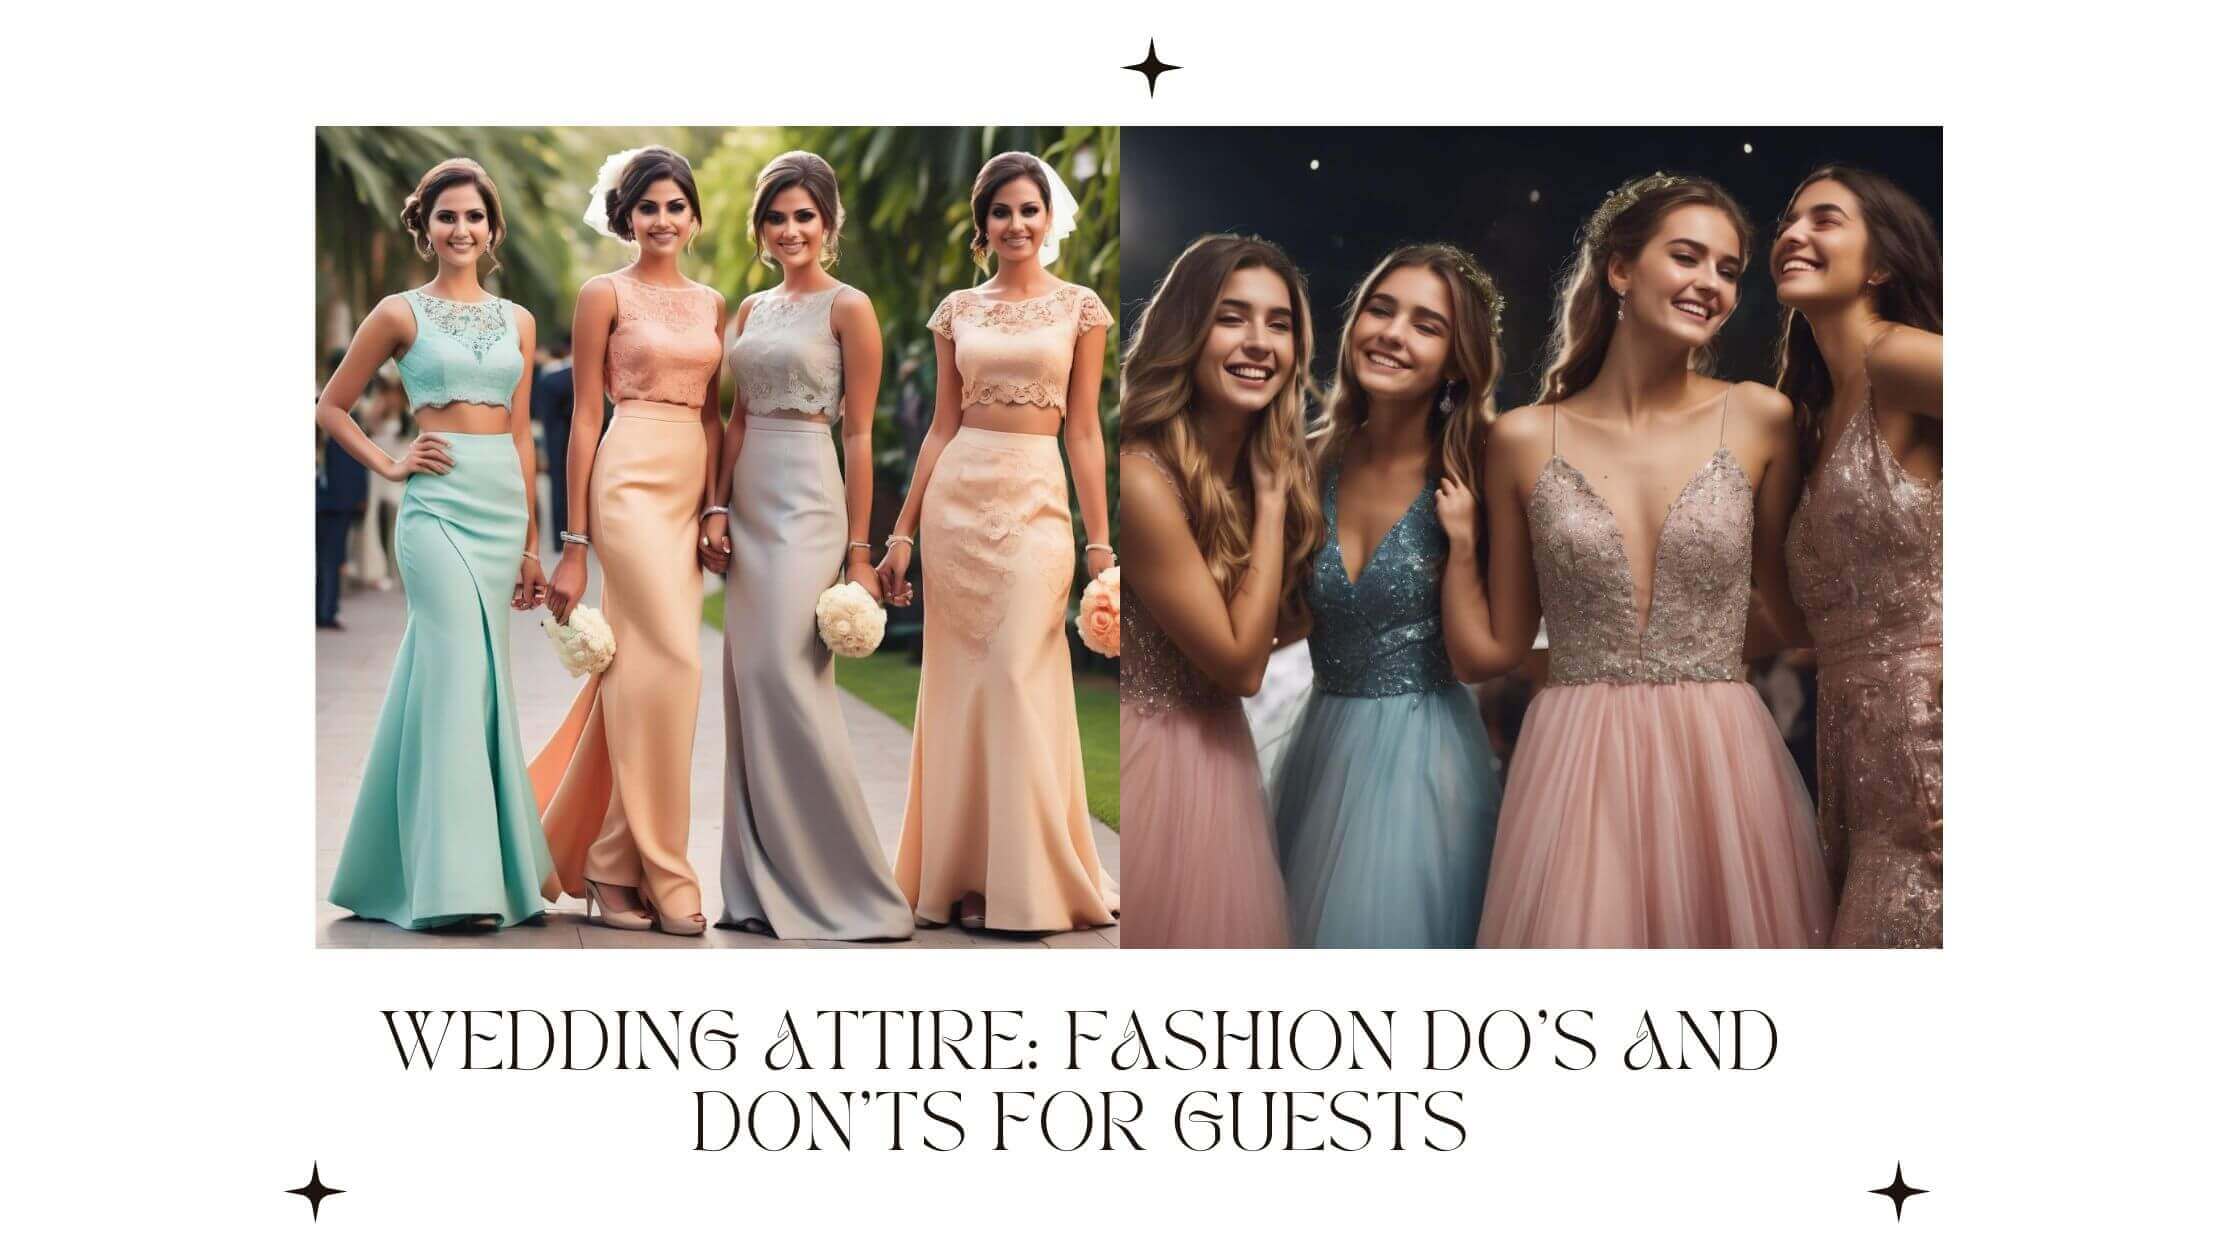 Wedding Attire: Fashion Do’s and Don'ts for Guests